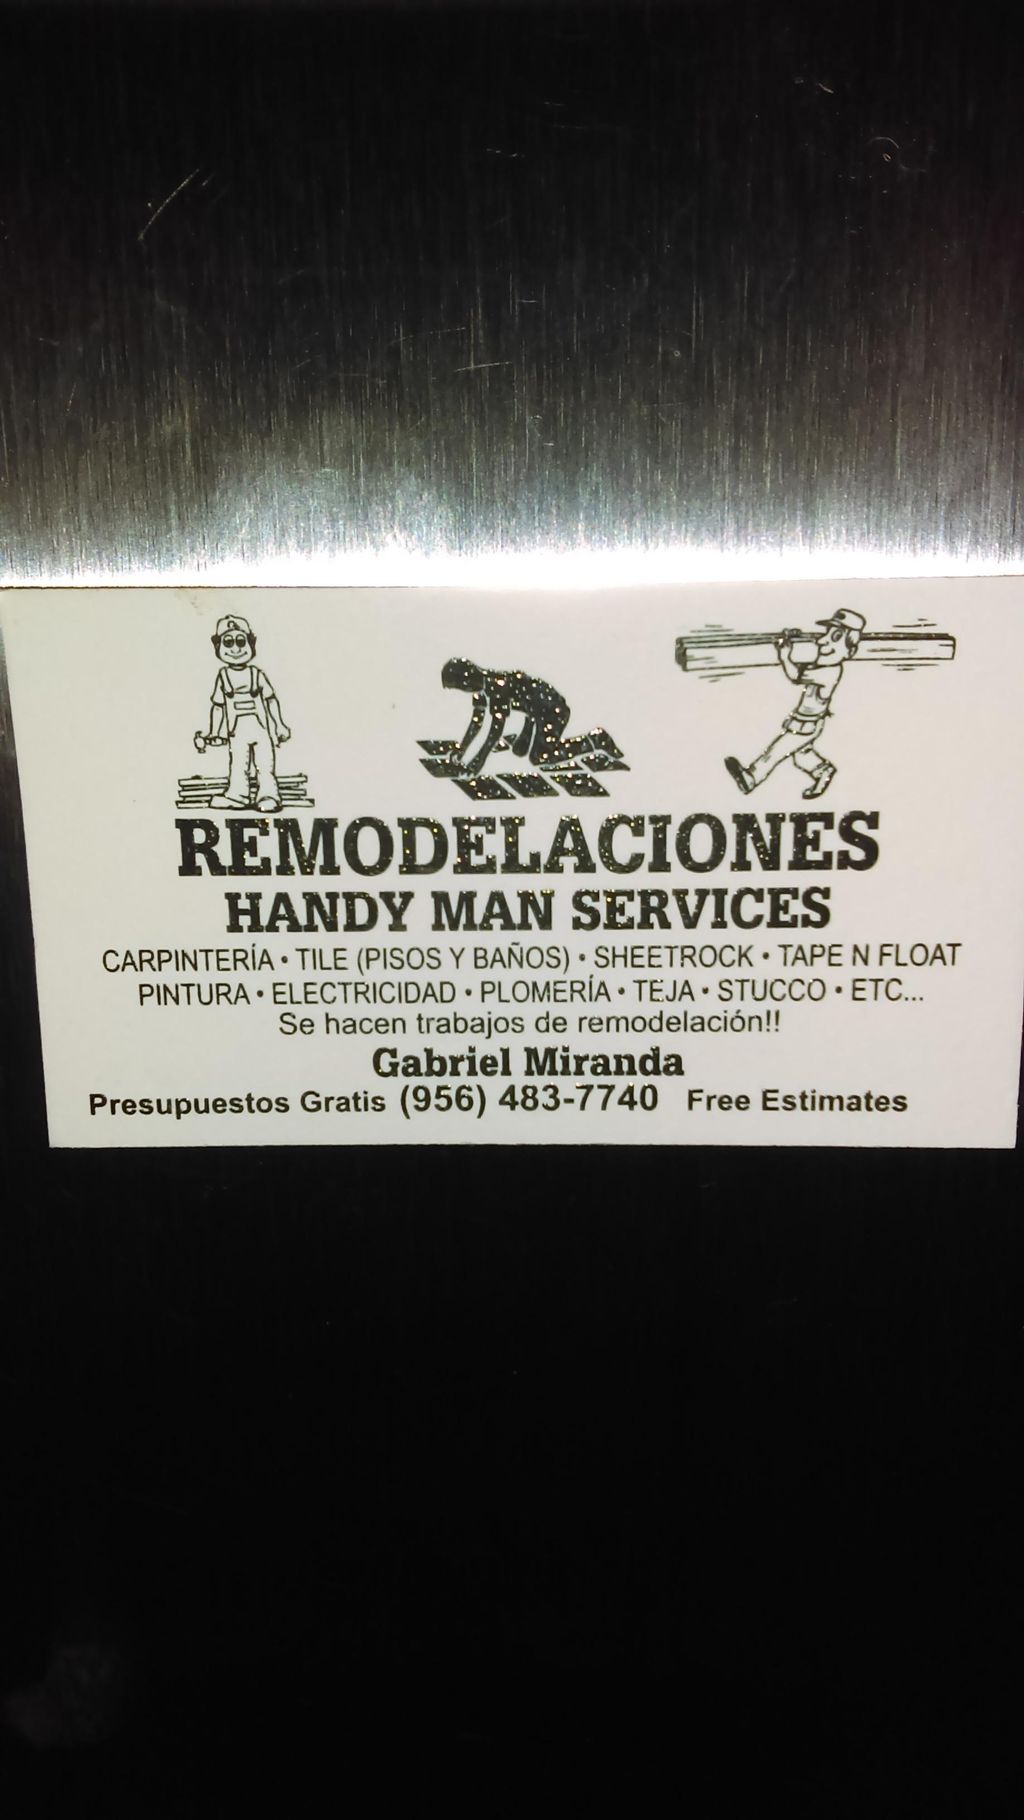 Remodeling and handyman services